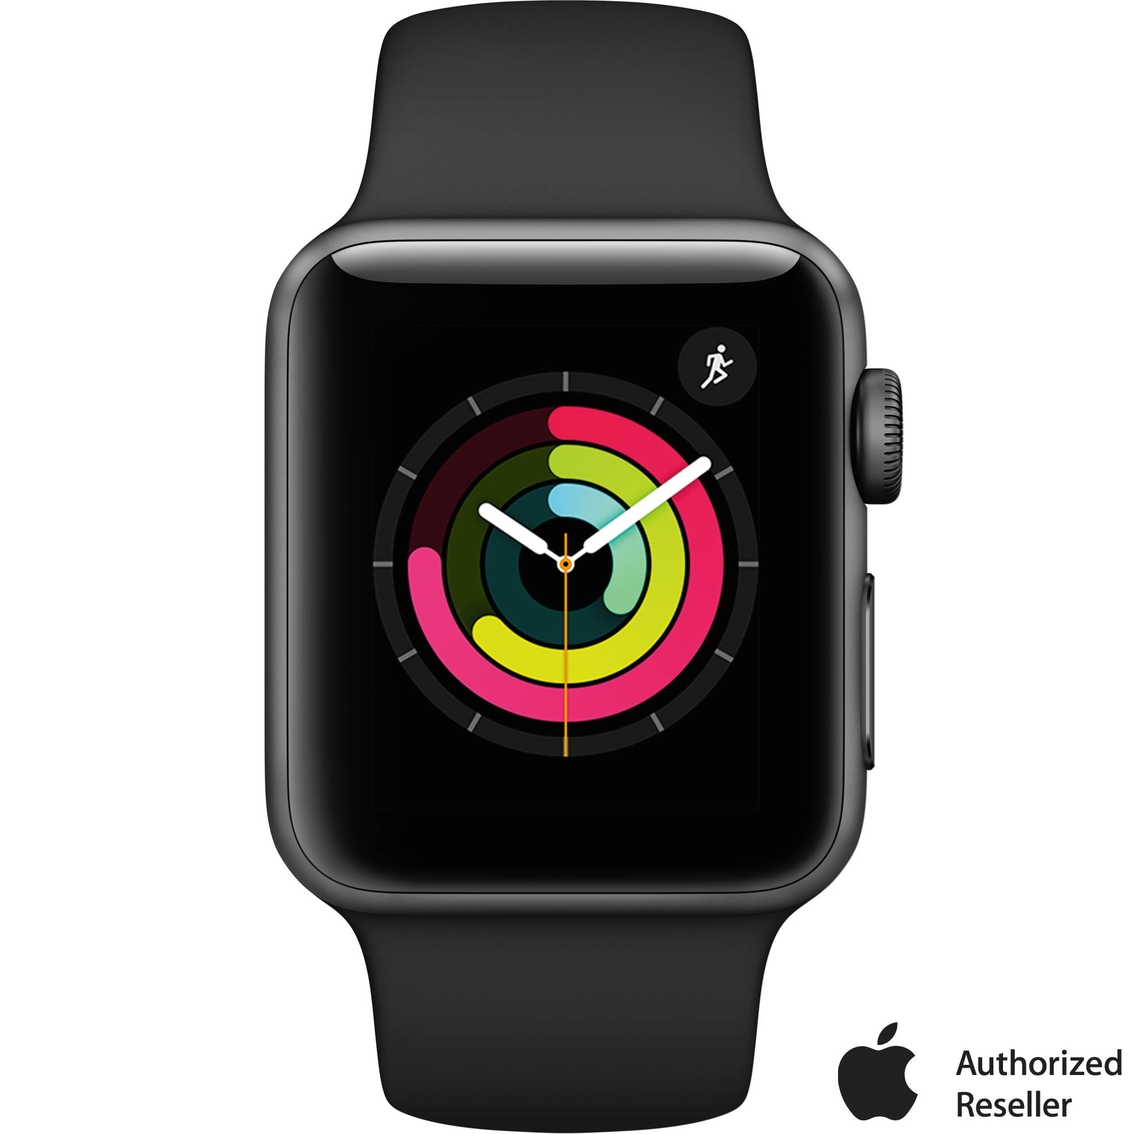 Apple Watch Series 3 Gps Space Gray Aluminum Case With Black Sport Band Apple Watches Electronics Shop The Exchange